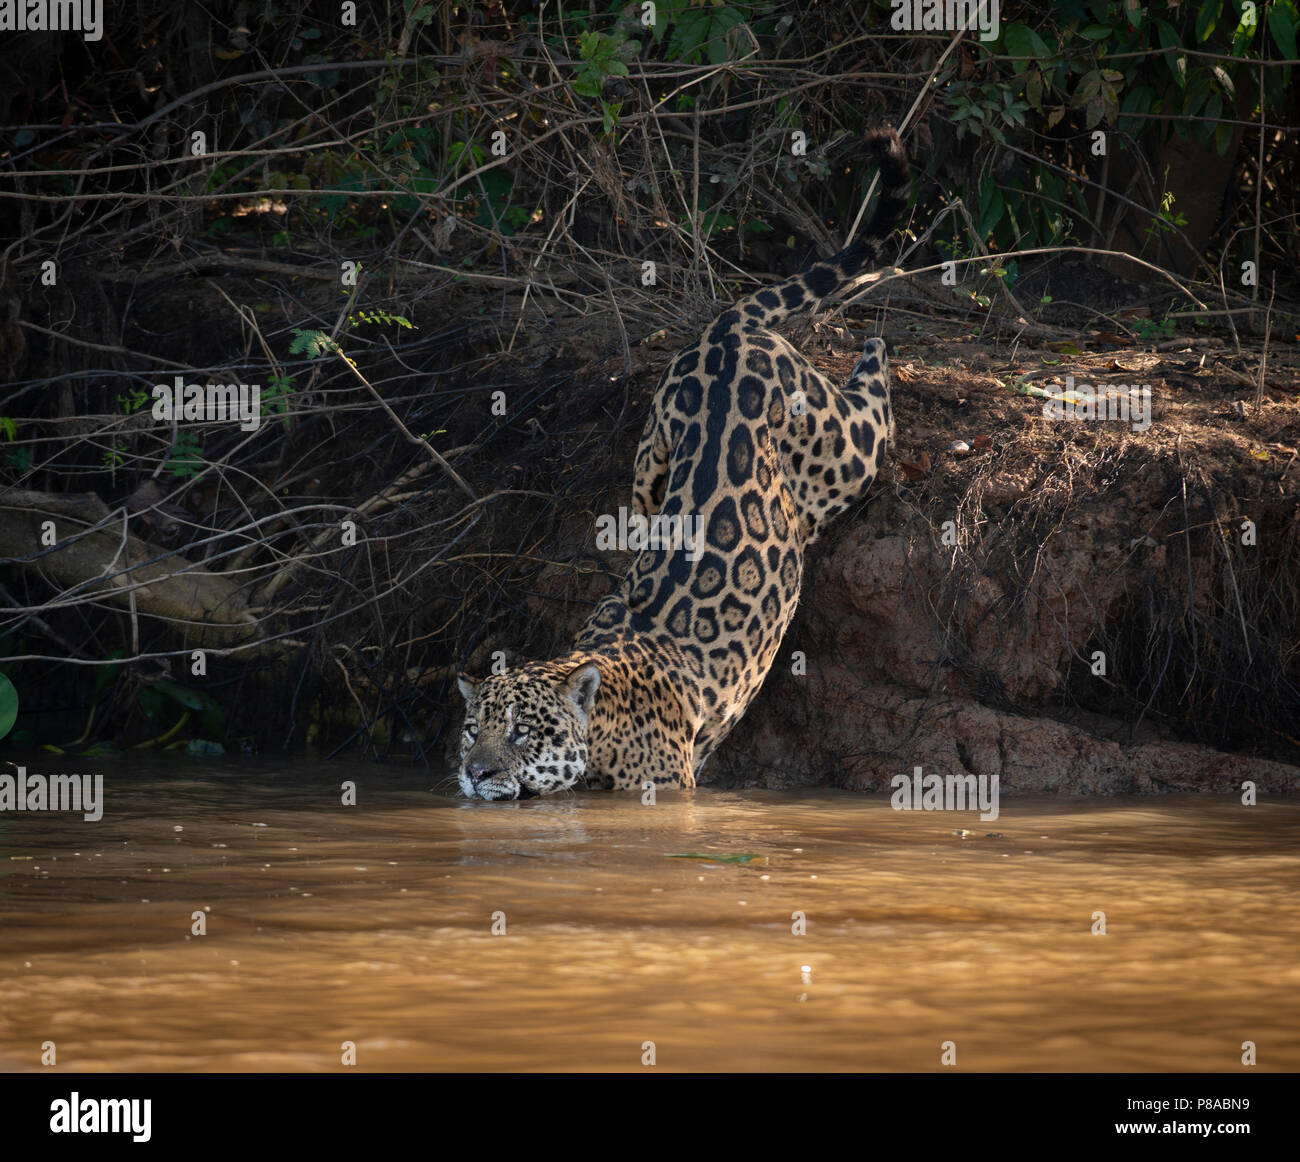 A Jaguar entereing the water in North Pantanal Stock Photo